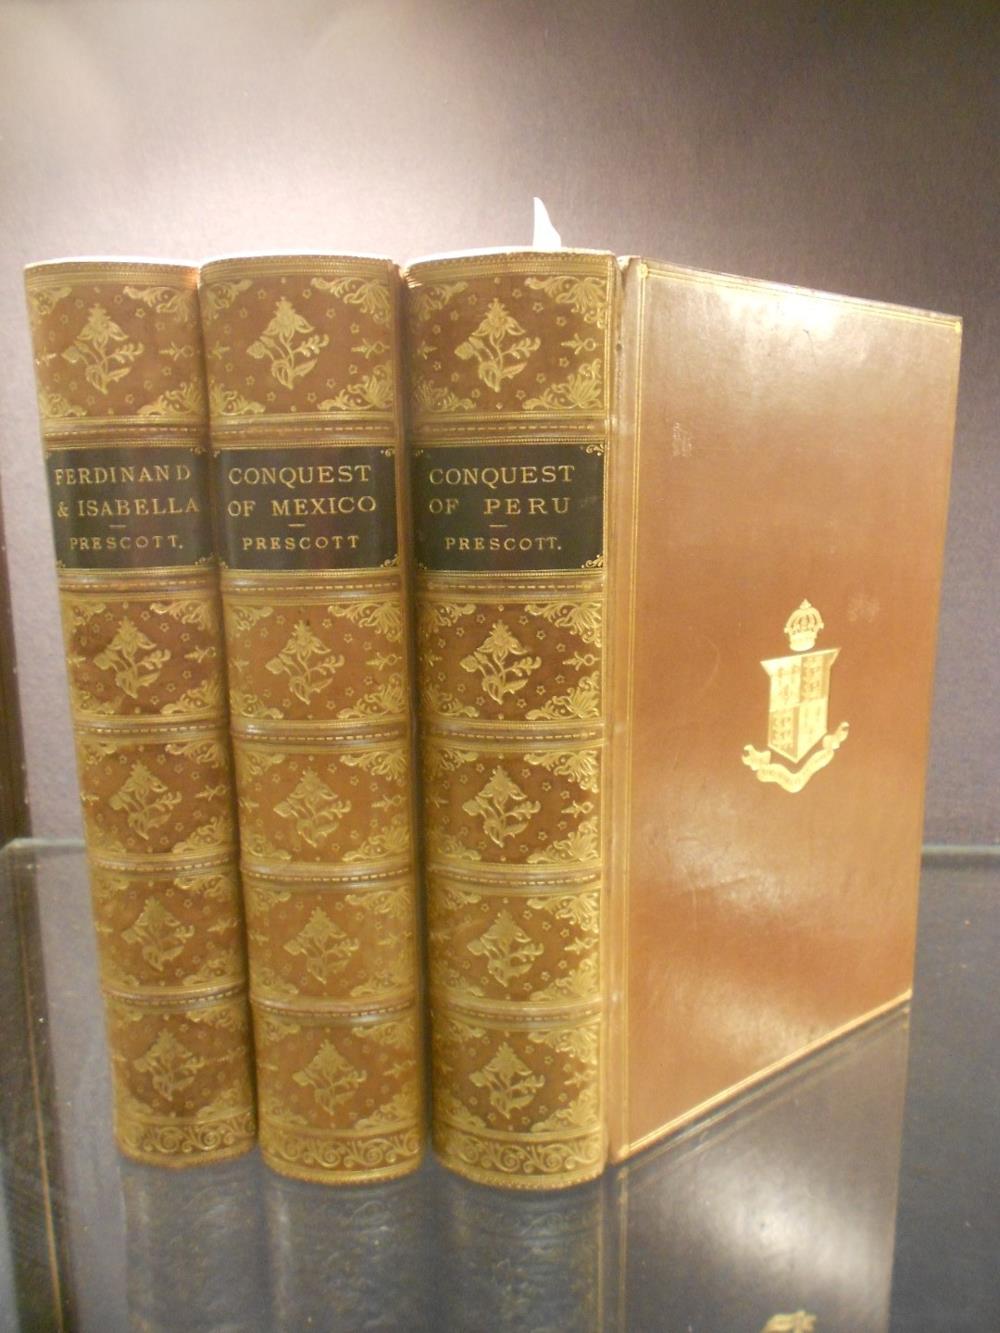 Bindings. Collection of 40 vols, 8vo, circa 1900, classic works and novels, with Institution of